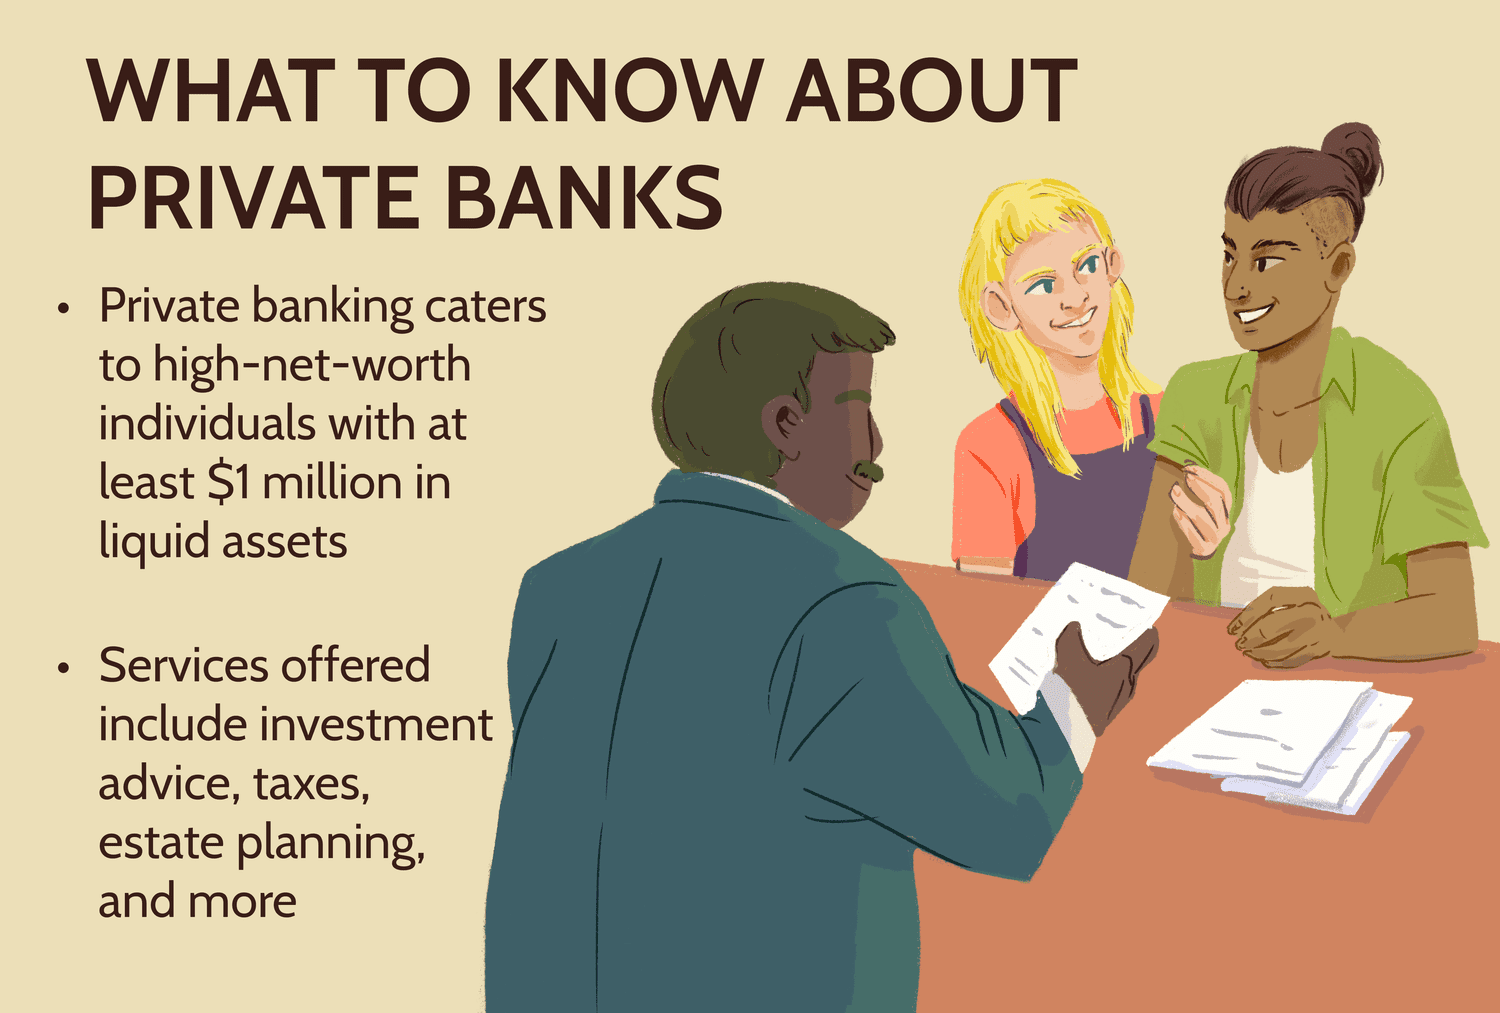 What to know about private banks explained